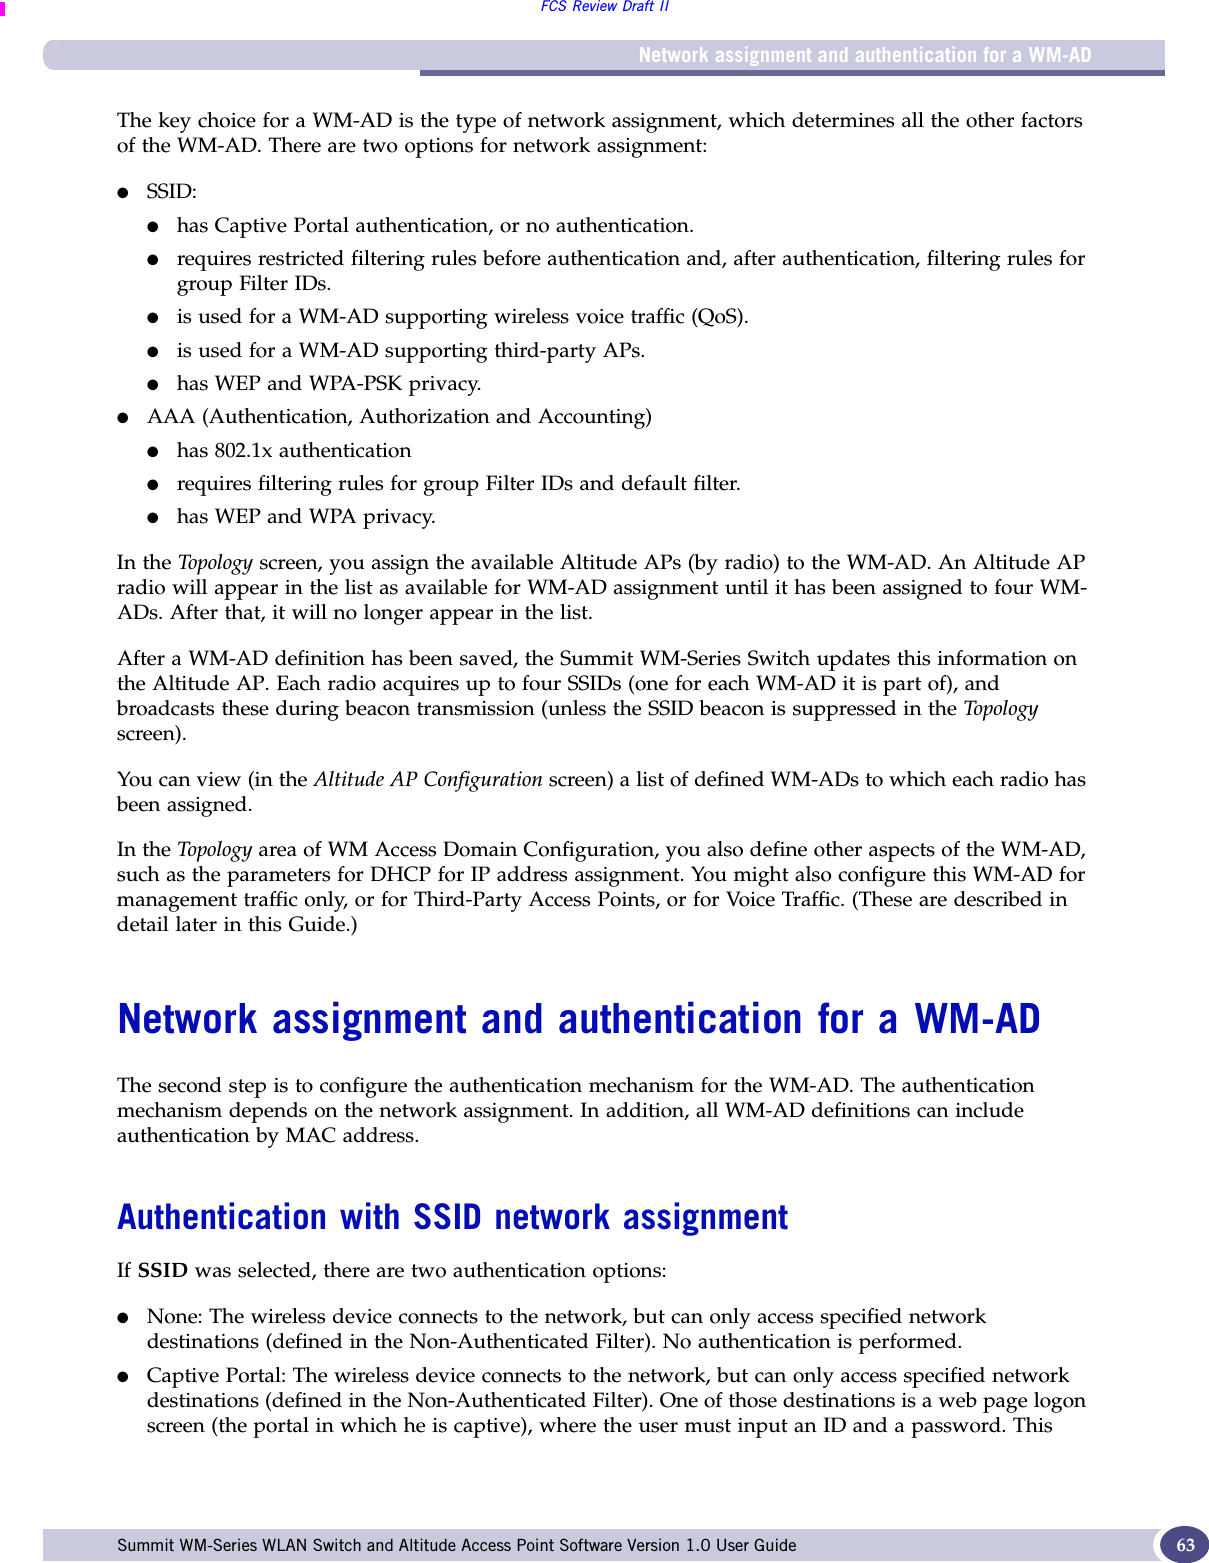 Network assignment and authentication for a WM-ADFCS Review Draft IISummit WM-Series WLAN Switch and Altitude Access Point Software Version 1.0 User Guide 63The key choice for a WM-AD is the type of network assignment, which determines all the other factors of the WM-AD. There are two options for network assignment:●SSID:●has Captive Portal authentication, or no authentication.●requires restricted filtering rules before authentication and, after authentication, filtering rules for group Filter IDs. ●is used for a WM-AD supporting wireless voice traffic (QoS).●is used for a WM-AD supporting third-party APs.●has WEP and WPA-PSK privacy.●AAA (Authentication, Authorization and Accounting)●has 802.1x authentication●requires filtering rules for group Filter IDs and default filter.●has WEP and WPA privacy.In the Topology screen, you assign the available Altitude APs (by radio) to the WM-AD. An Altitude AP radio will appear in the list as available for WM-AD assignment until it has been assigned to four WM-ADs. After that, it will no longer appear in the list.After a WM-AD definition has been saved, the Summit WM-Series Switch updates this information on the Altitude AP. Each radio acquires up to four SSIDs (one for each WM-AD it is part of), and broadcasts these during beacon transmission (unless the SSID beacon is suppressed in the Topology screen).You can view (in the Altitude AP Configuration screen) a list of defined WM-ADs to which each radio has been assigned.In the Top olog y area of WM Access Domain Configuration, you also define other aspects of the WM-AD, such as the parameters for DHCP for IP address assignment. You might also configure this WM-AD for management traffic only, or for Third-Party Access Points, or for Voice Traffic. (These are described in detail later in this Guide.)Network assignment and authentication for a WM-ADThe second step is to configure the authentication mechanism for the WM-AD. The authentication mechanism depends on the network assignment. In addition, all WM-AD definitions can include authentication by MAC address.Authentication with SSID network assignmentIf SSID was selected, there are two authentication options:●None: The wireless device connects to the network, but can only access specified network destinations (defined in the Non-Authenticated Filter). No authentication is performed.●Captive Portal: The wireless device connects to the network, but can only access specified network destinations (defined in the Non-Authenticated Filter). One of those destinations is a web page logon screen (the portal in which he is captive), where the user must input an ID and a password. This 